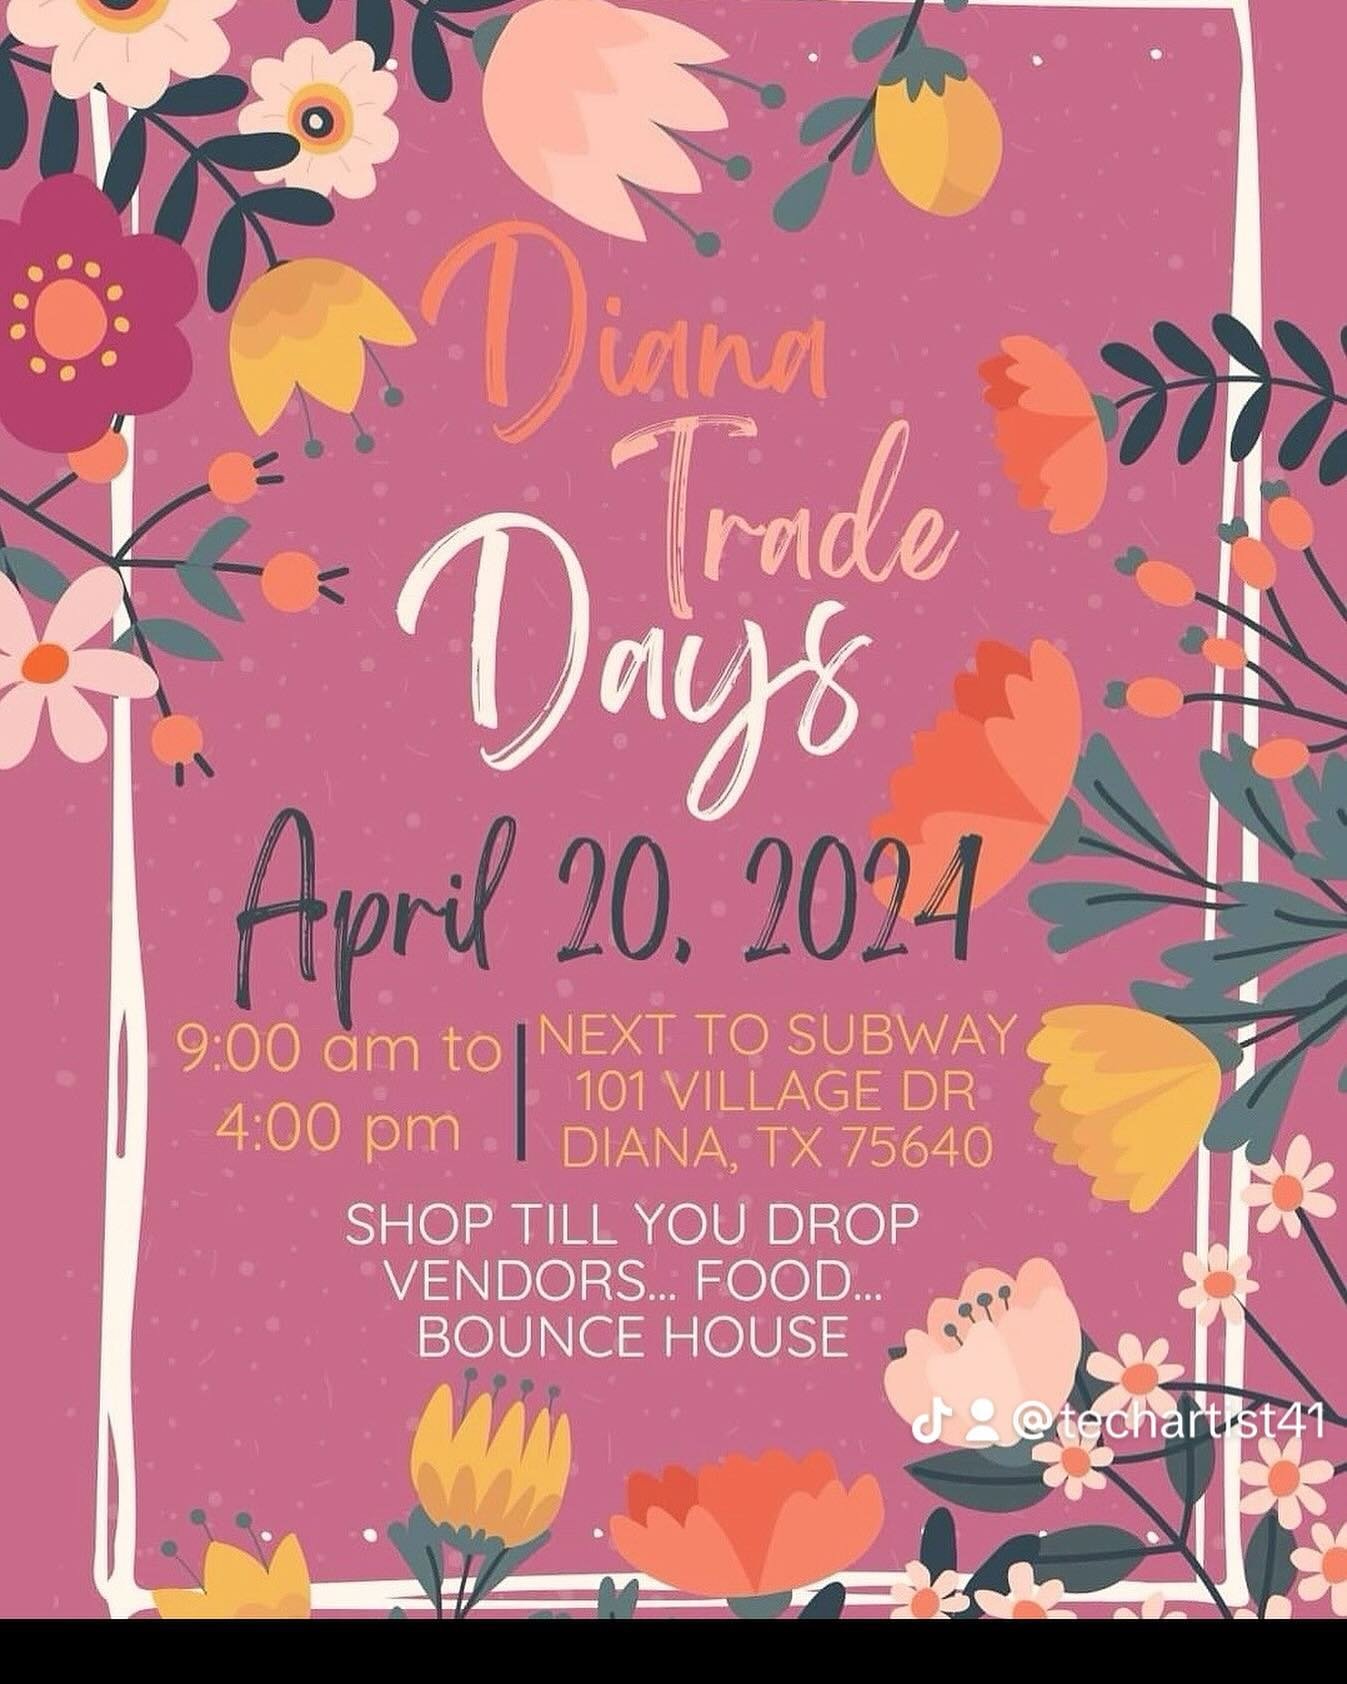 Diana Trade days got rescheduled to the 27. It got rained out and rescheduled. #art #artist #printshop #prints #stickers If you want to still purchase some of my art then visit my #shop at shop.timothyjpritchettportfolio.info